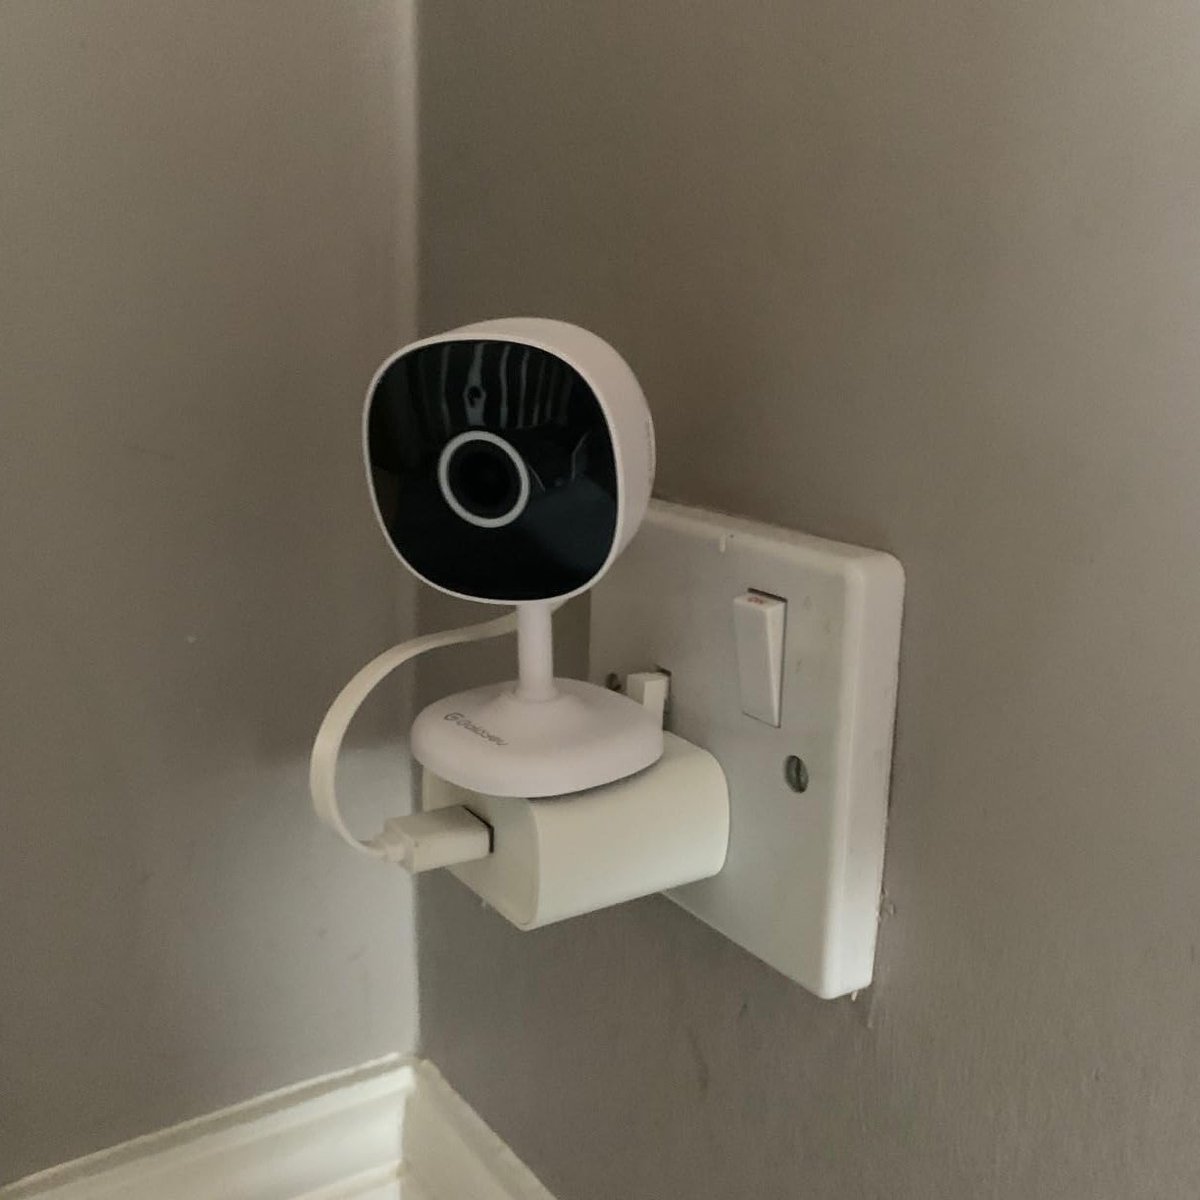 #DEAL ALERT!! 🔥 Get ready for the #GalayouG7 Prime Sale on Amazon US! - Single Unit: $14.99 - 2-Pack: $29.99 - 4-Pack: $59.99 Looking to upgrade your #homesecurity? Check out our selection of #indoorcamera! Shop Name: Xibolar Direct galayou-store.com/about_news #SmartHome